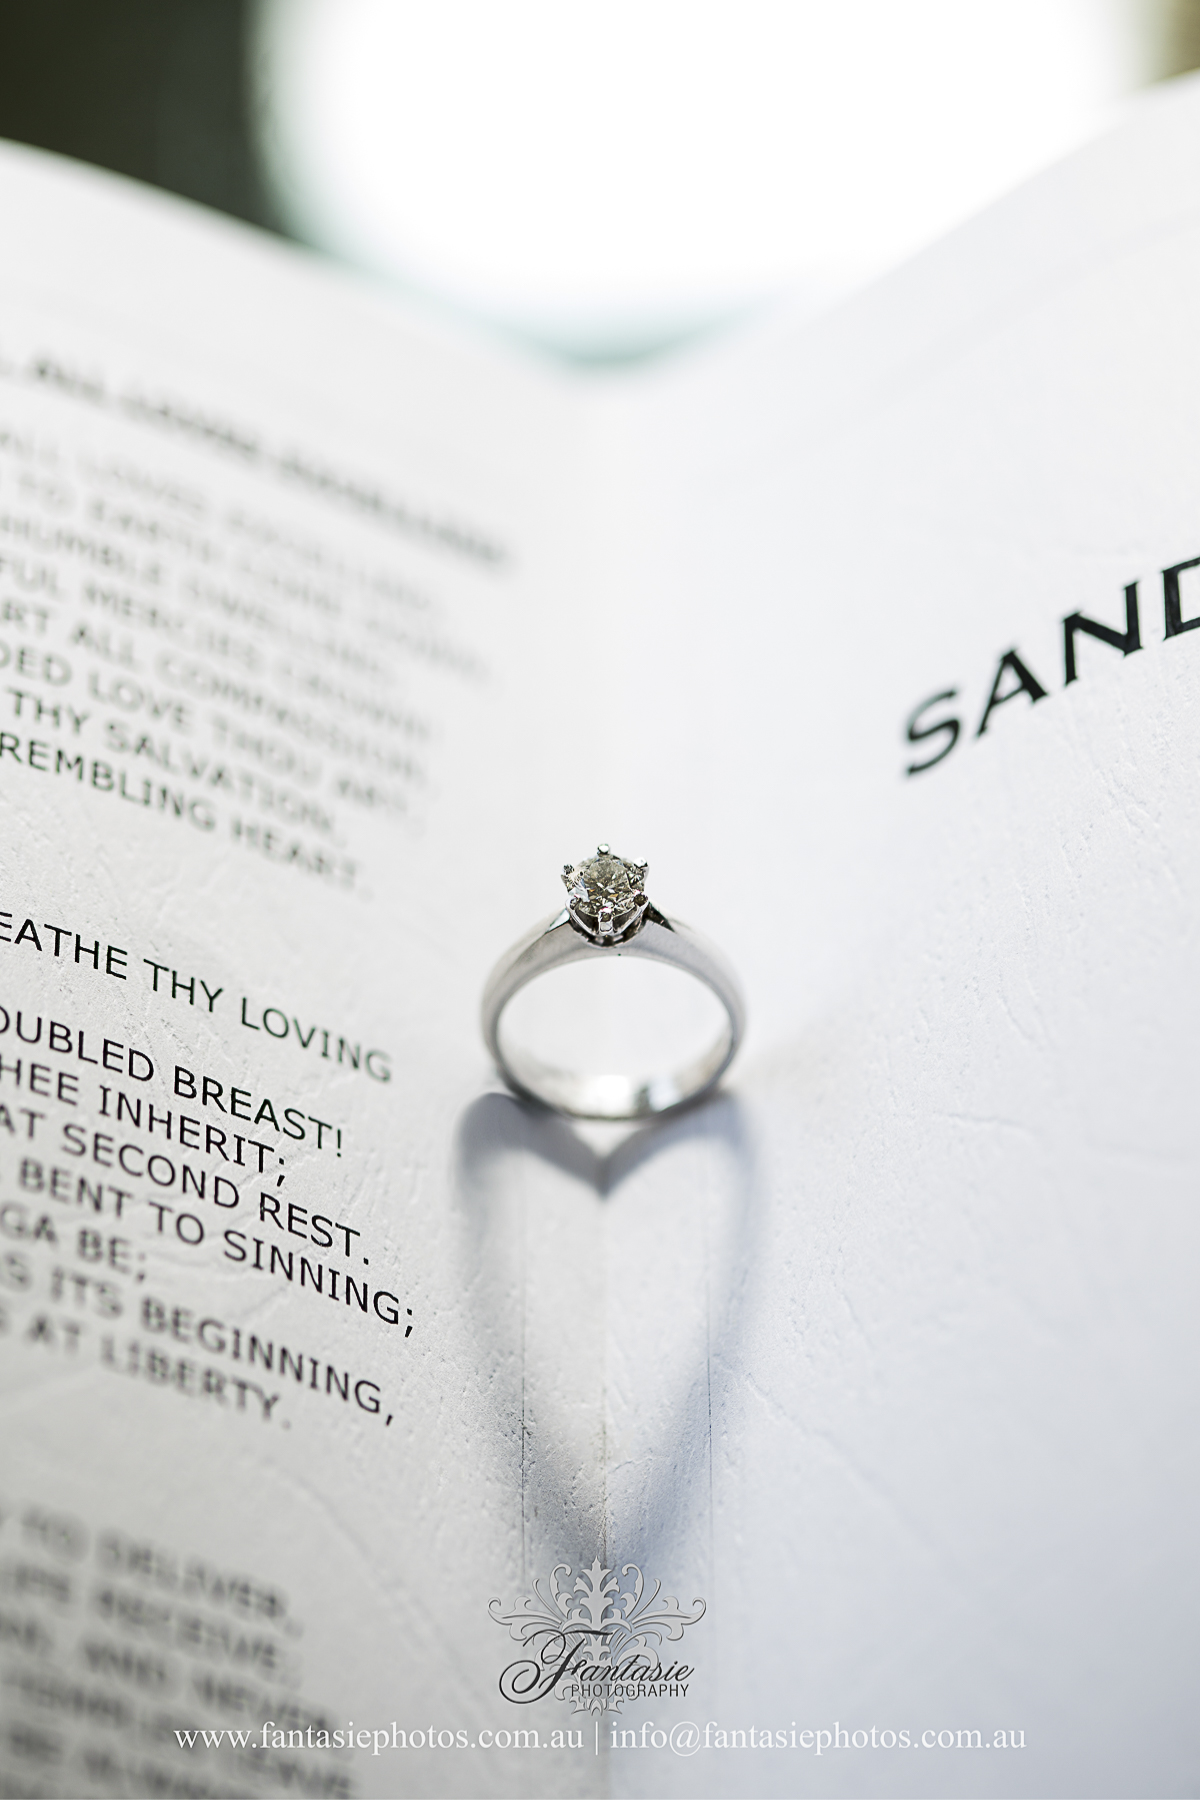 Love heart wedding engagement diamond ring in the book photo | Fantasie Photography